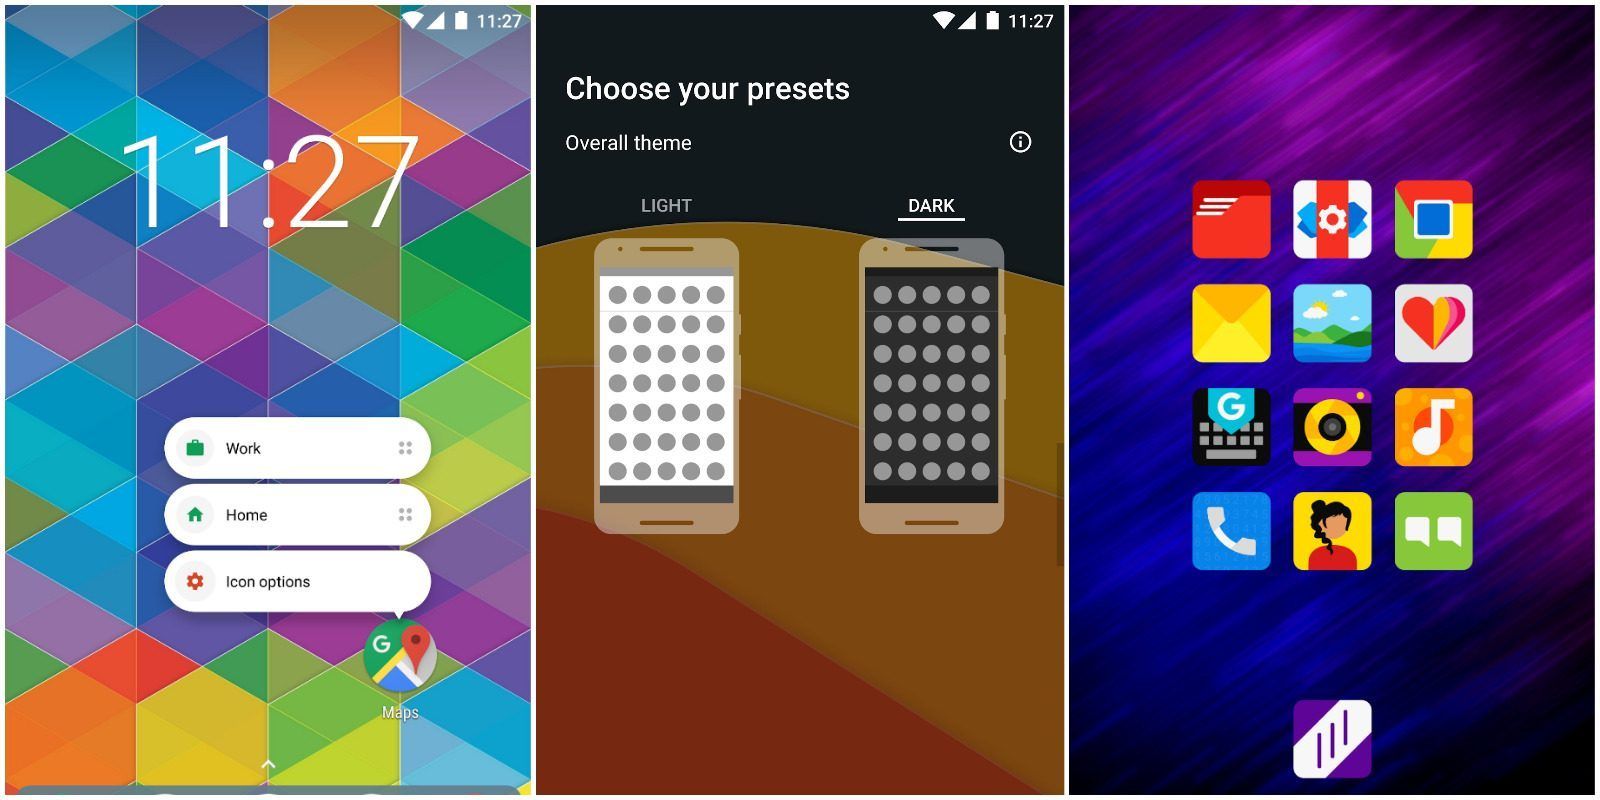 How To Fully Customize The Home Screen On Android